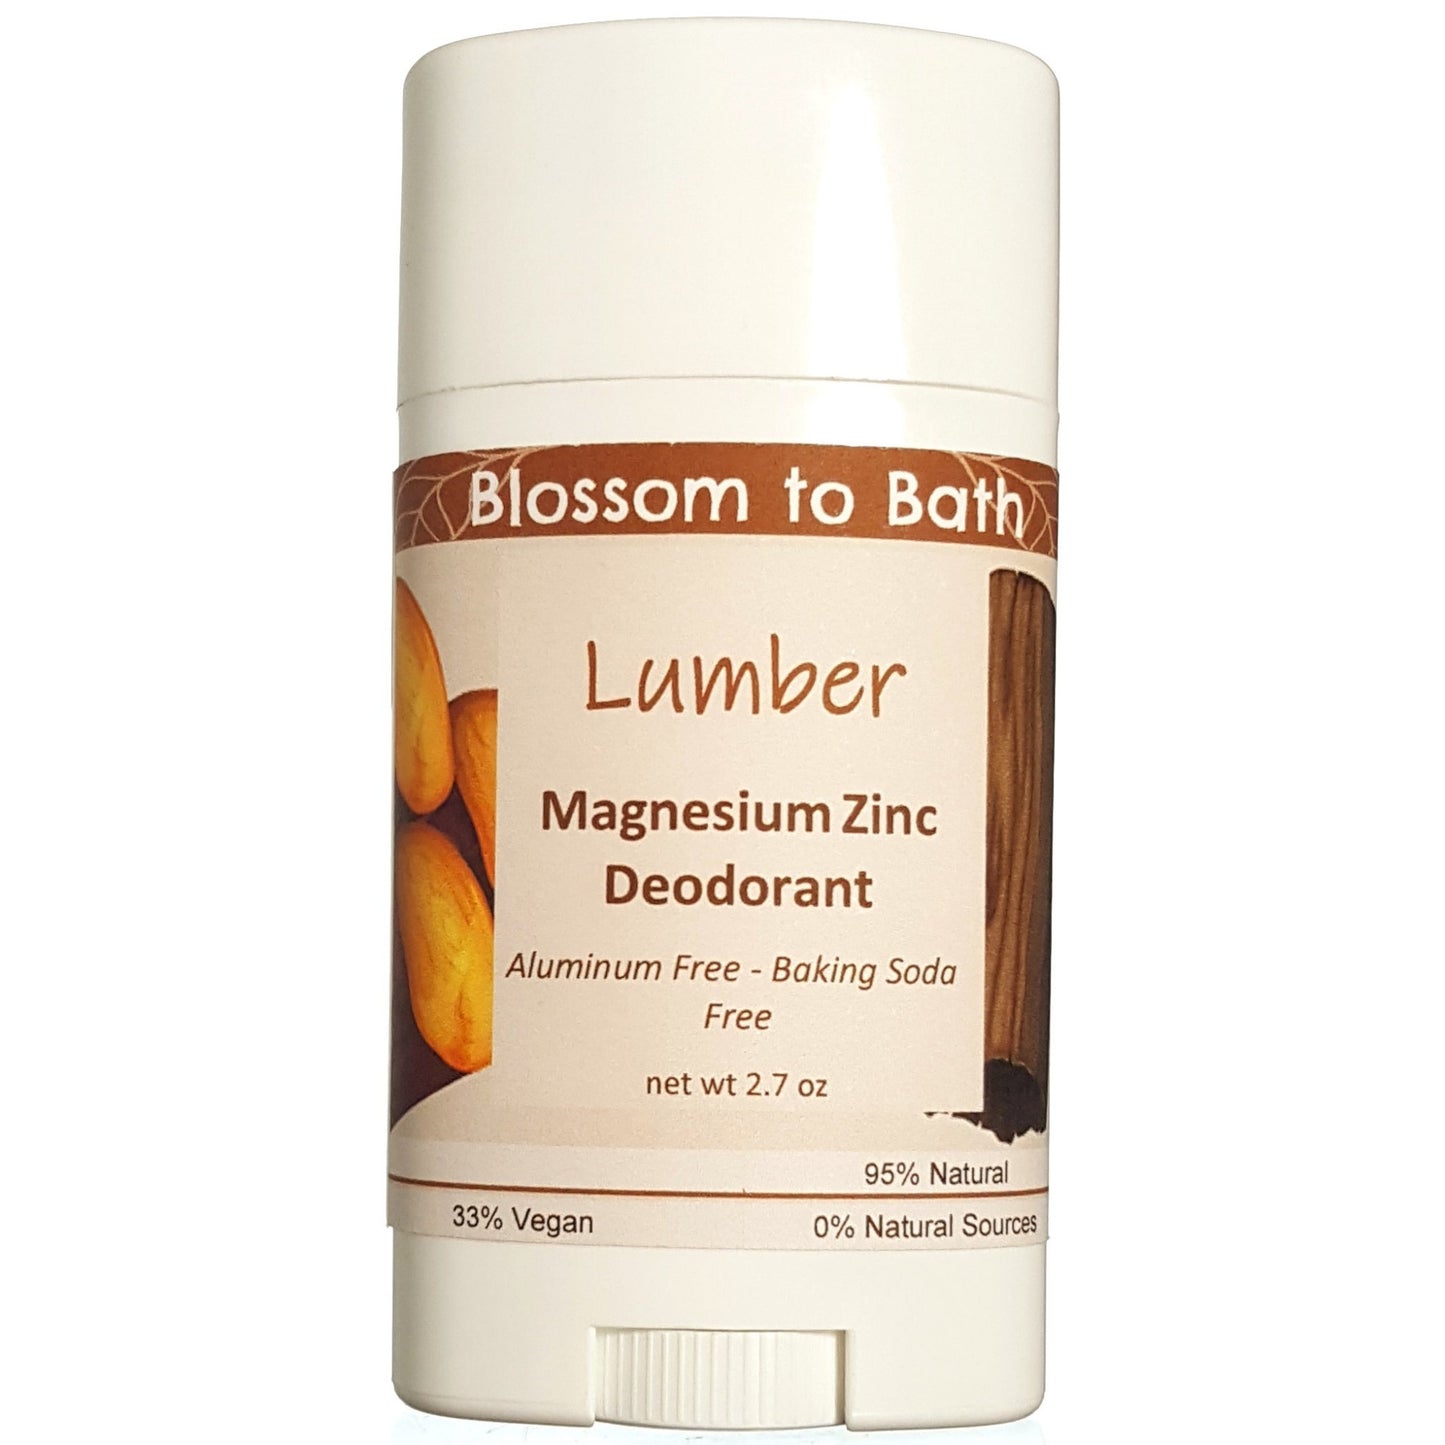 Buy Blossom to Bath Lumber Magnesium Zinc Deodorant from Flowersong Soap Studio.  Long lasting protection made from organic botanicals and butters, made without baking soda, tested in the Arizona heat  A masculine fragrance that echoes fresh cut trees.